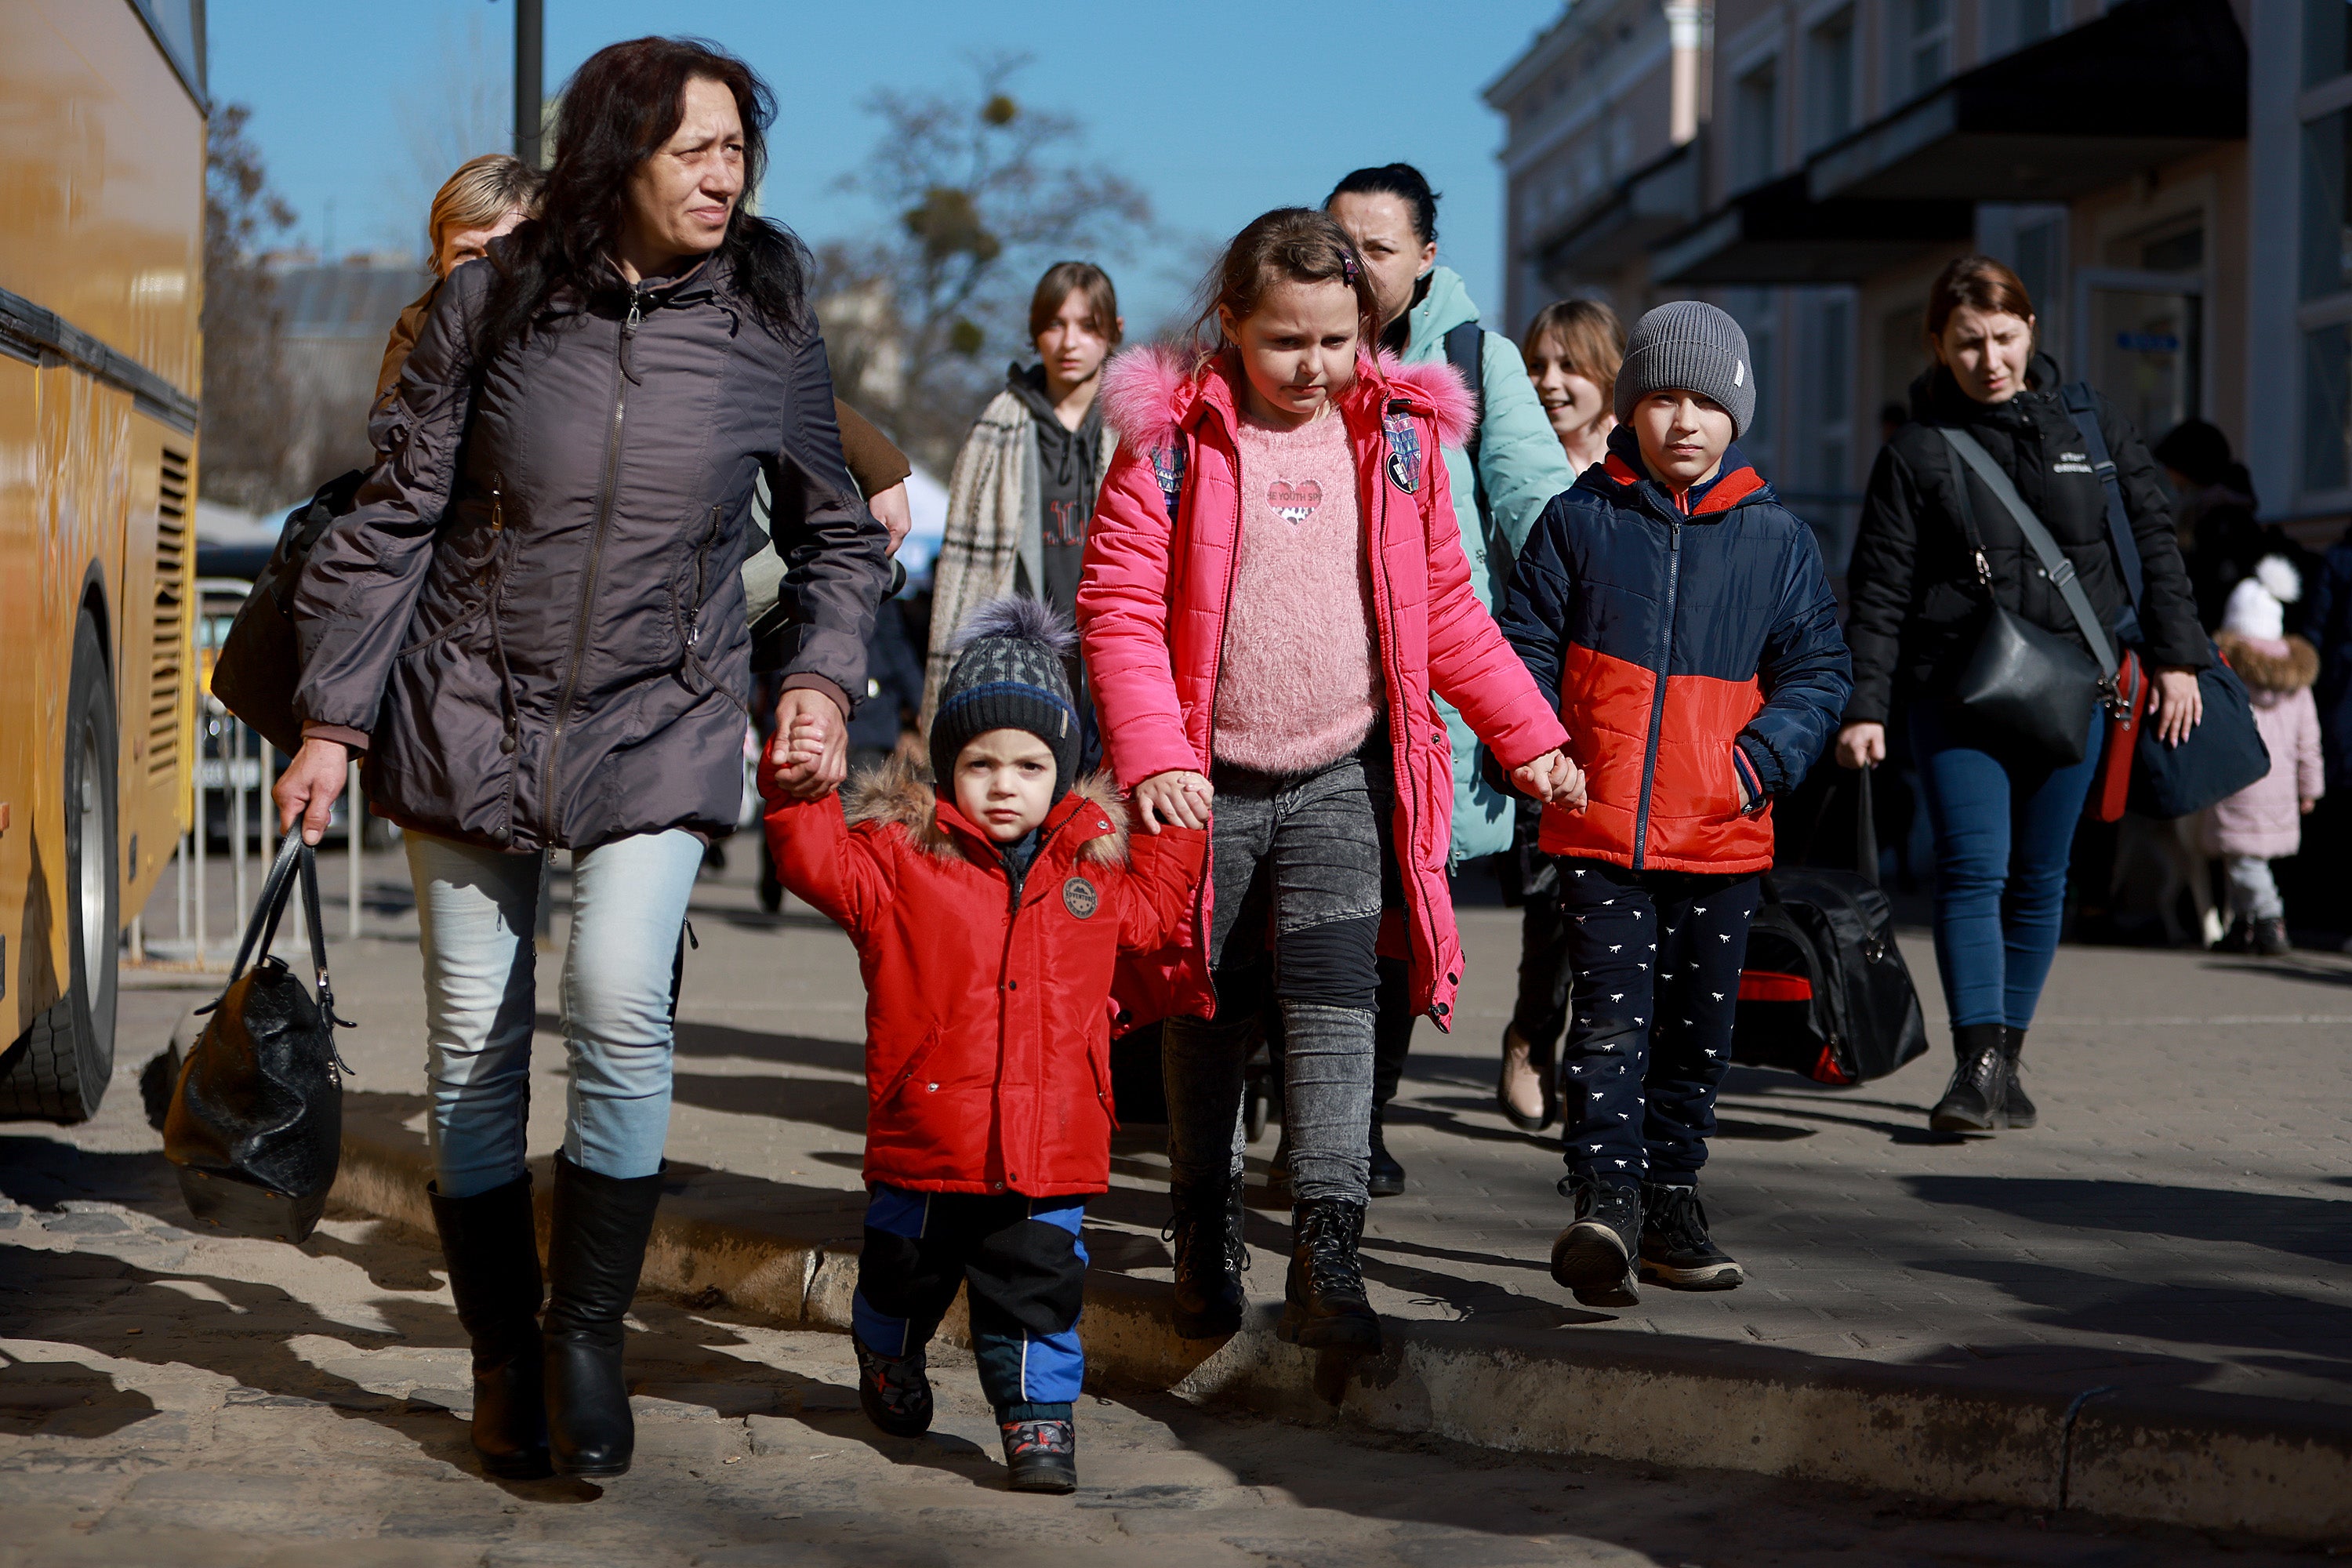 People from the town of Zaporizhzhia walk together after fleeing from their home town on the train